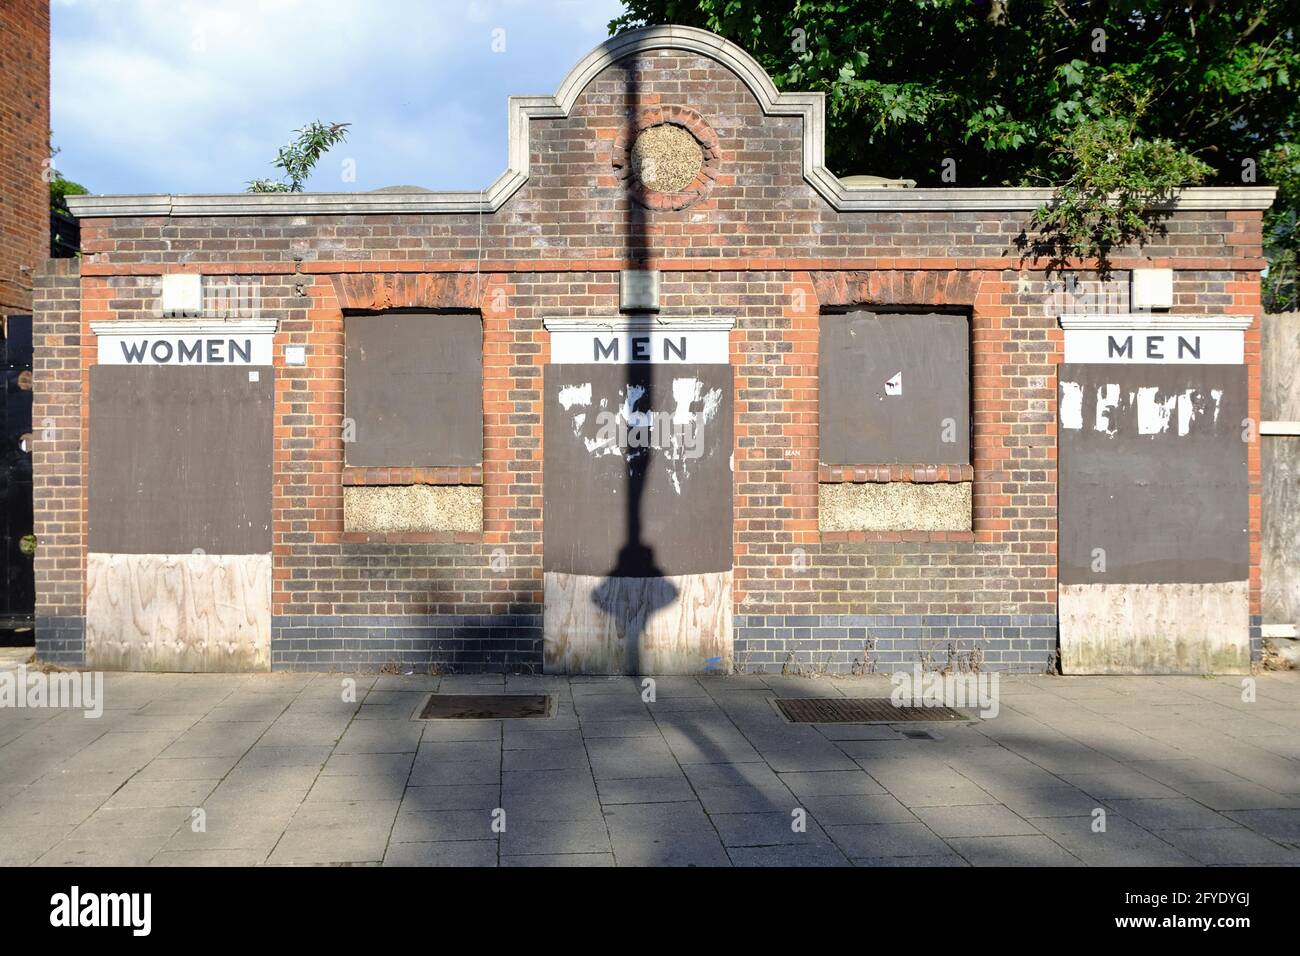 London, UK. Disused and boarded up Victorian toilet block in High Road, Tottenham. Stock Photo